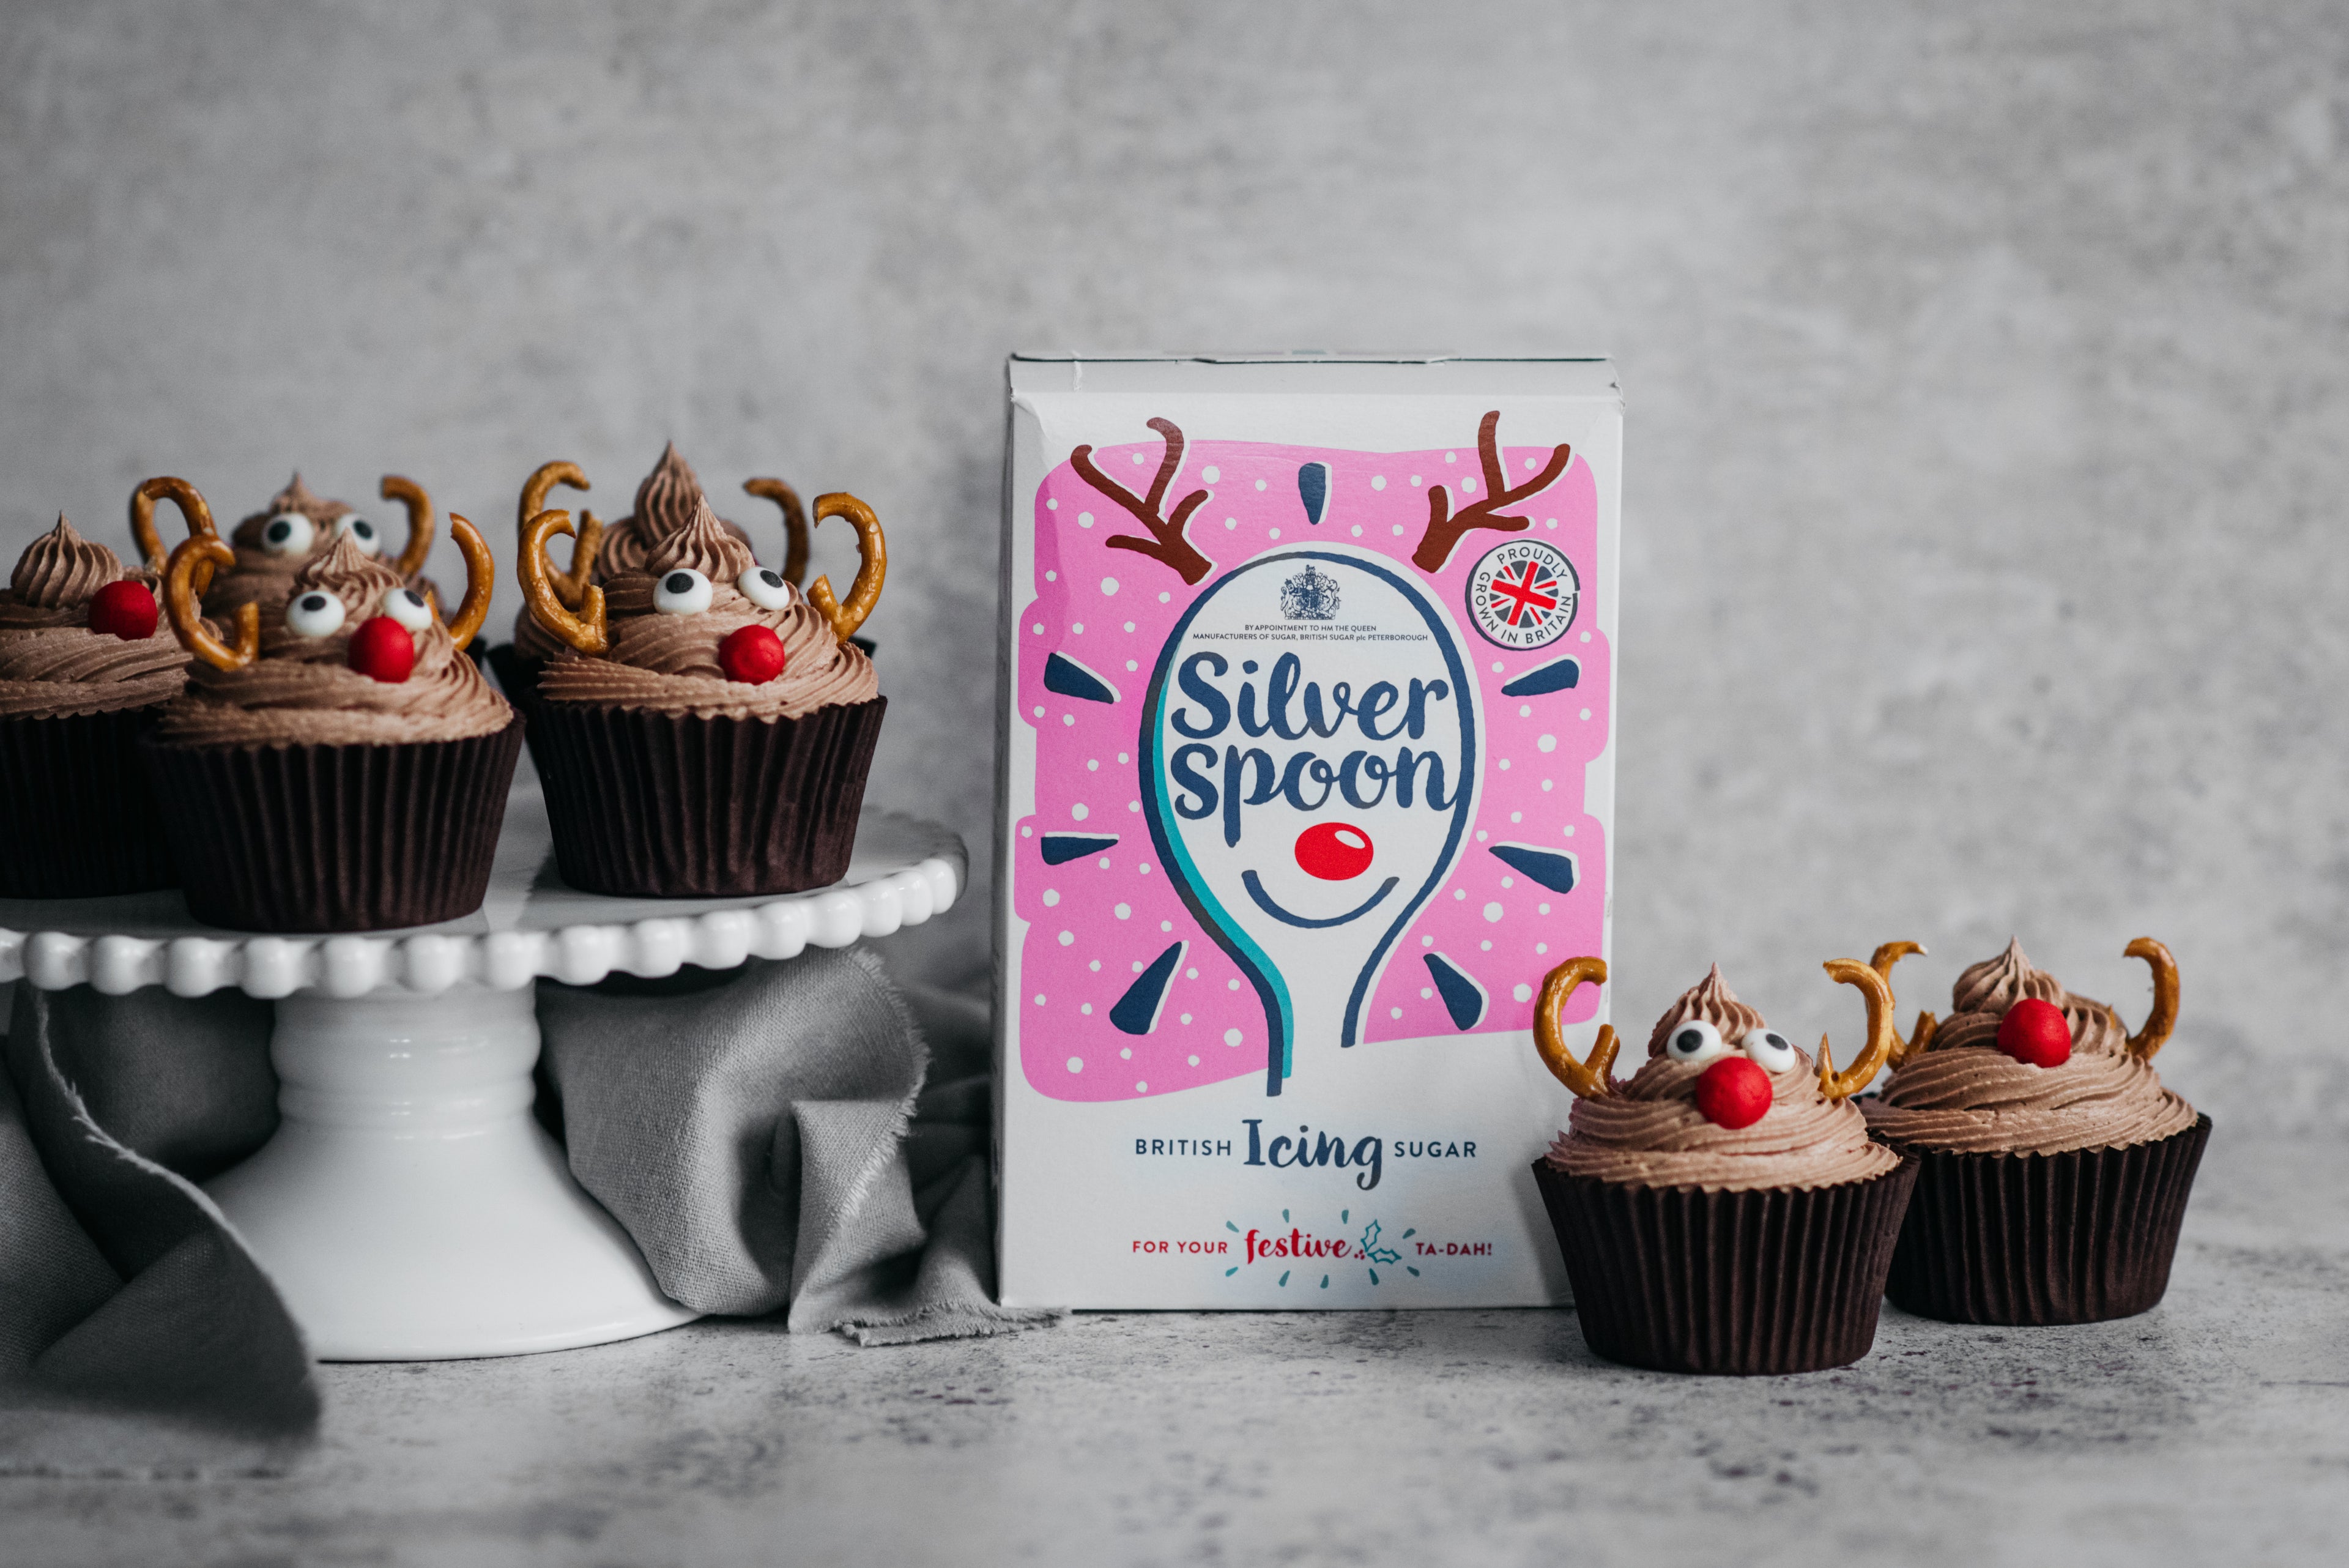 Reindeer Cupcakes on a cake stand, next to a box of Silver Spoon icing sugar, decorated with pretzel antlers and red nose sweets